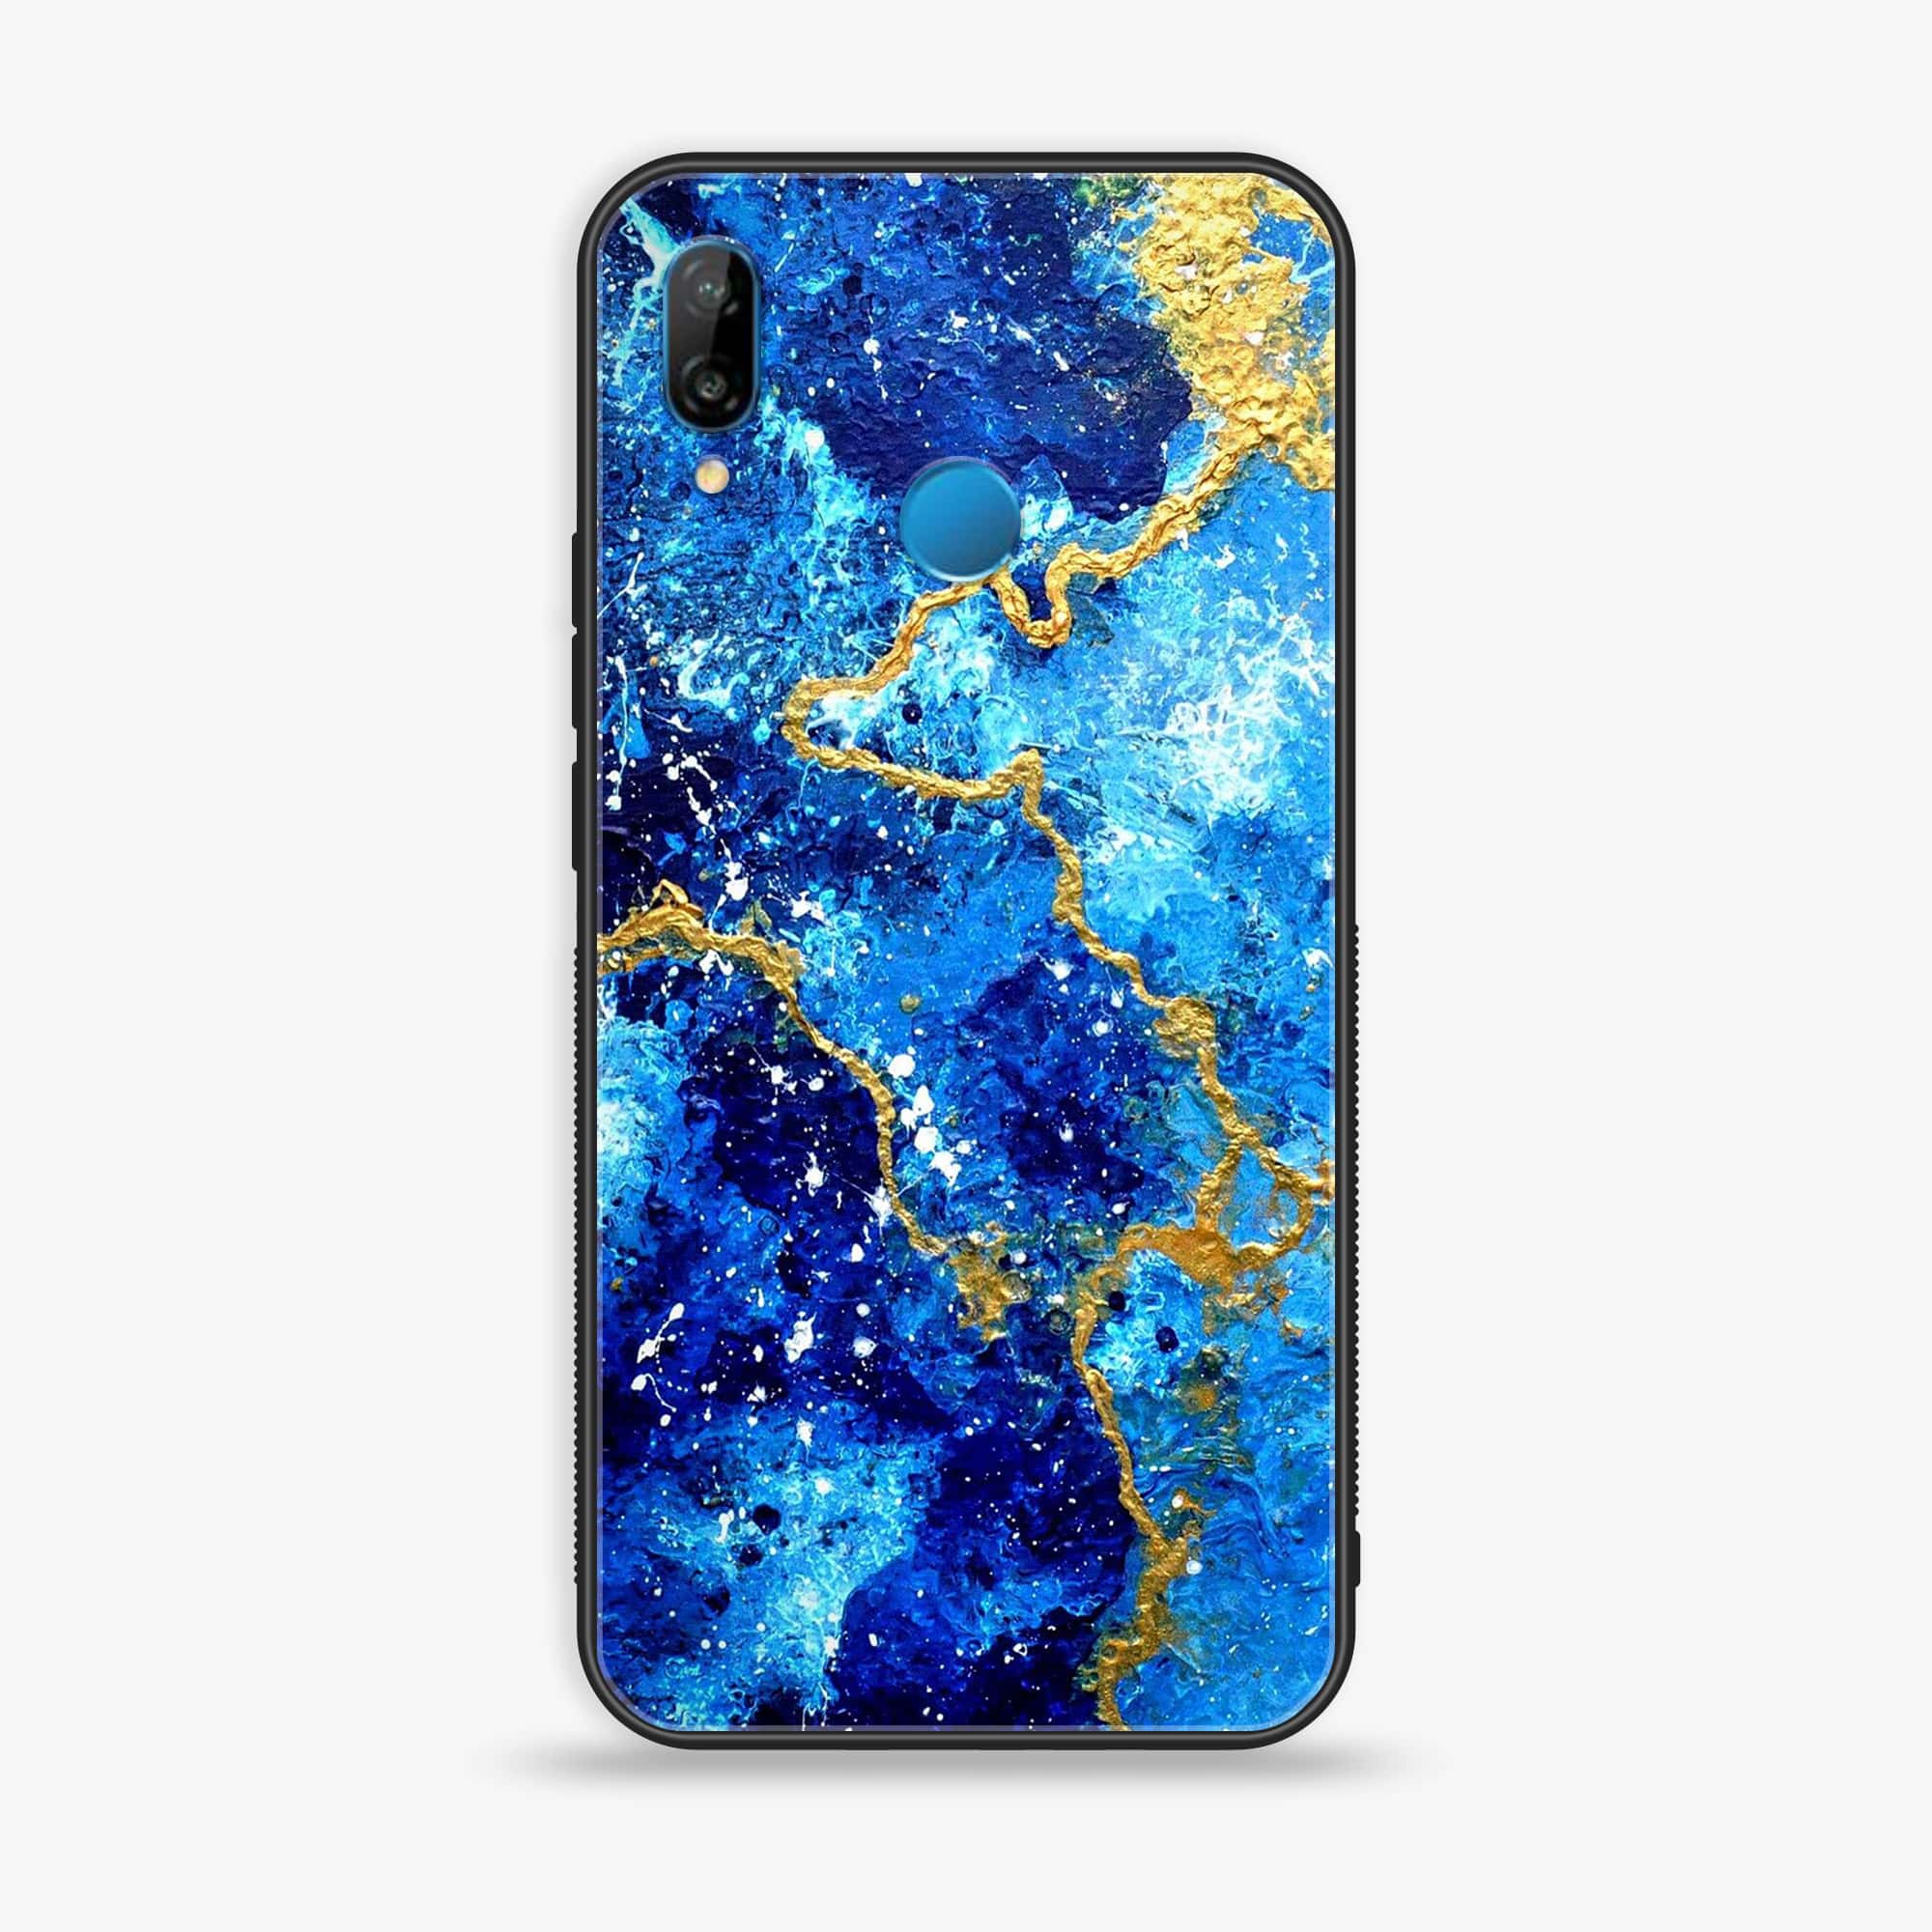 Huawei Y9 (2019) - Blue Marble Series V 2.0 - Premium Printed Glass soft Bumper shock Proof Case